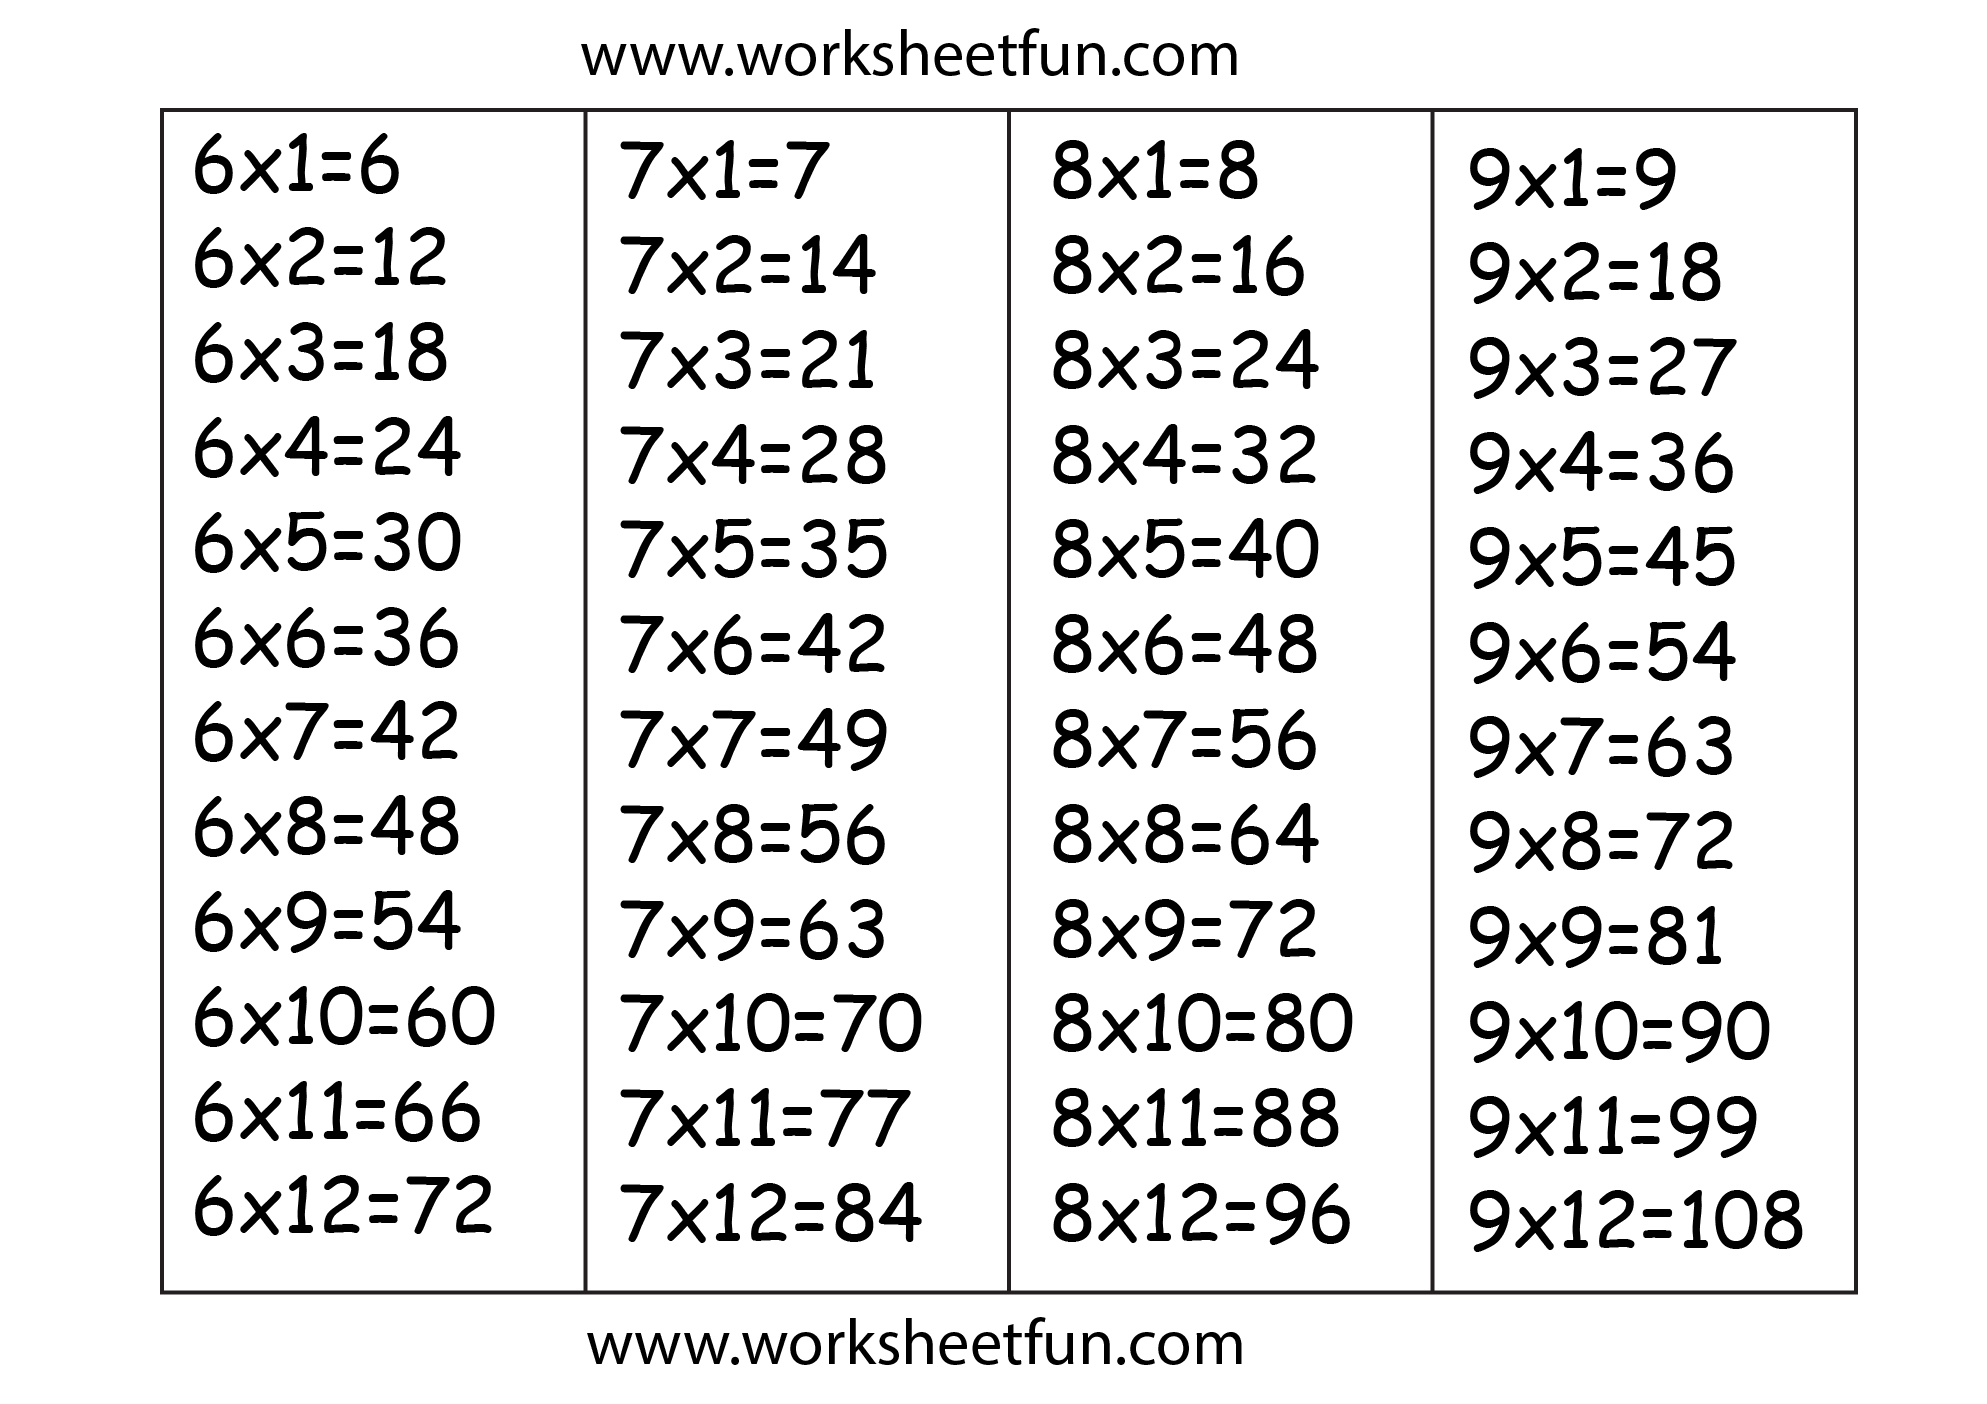 The 14 Times Table Chart